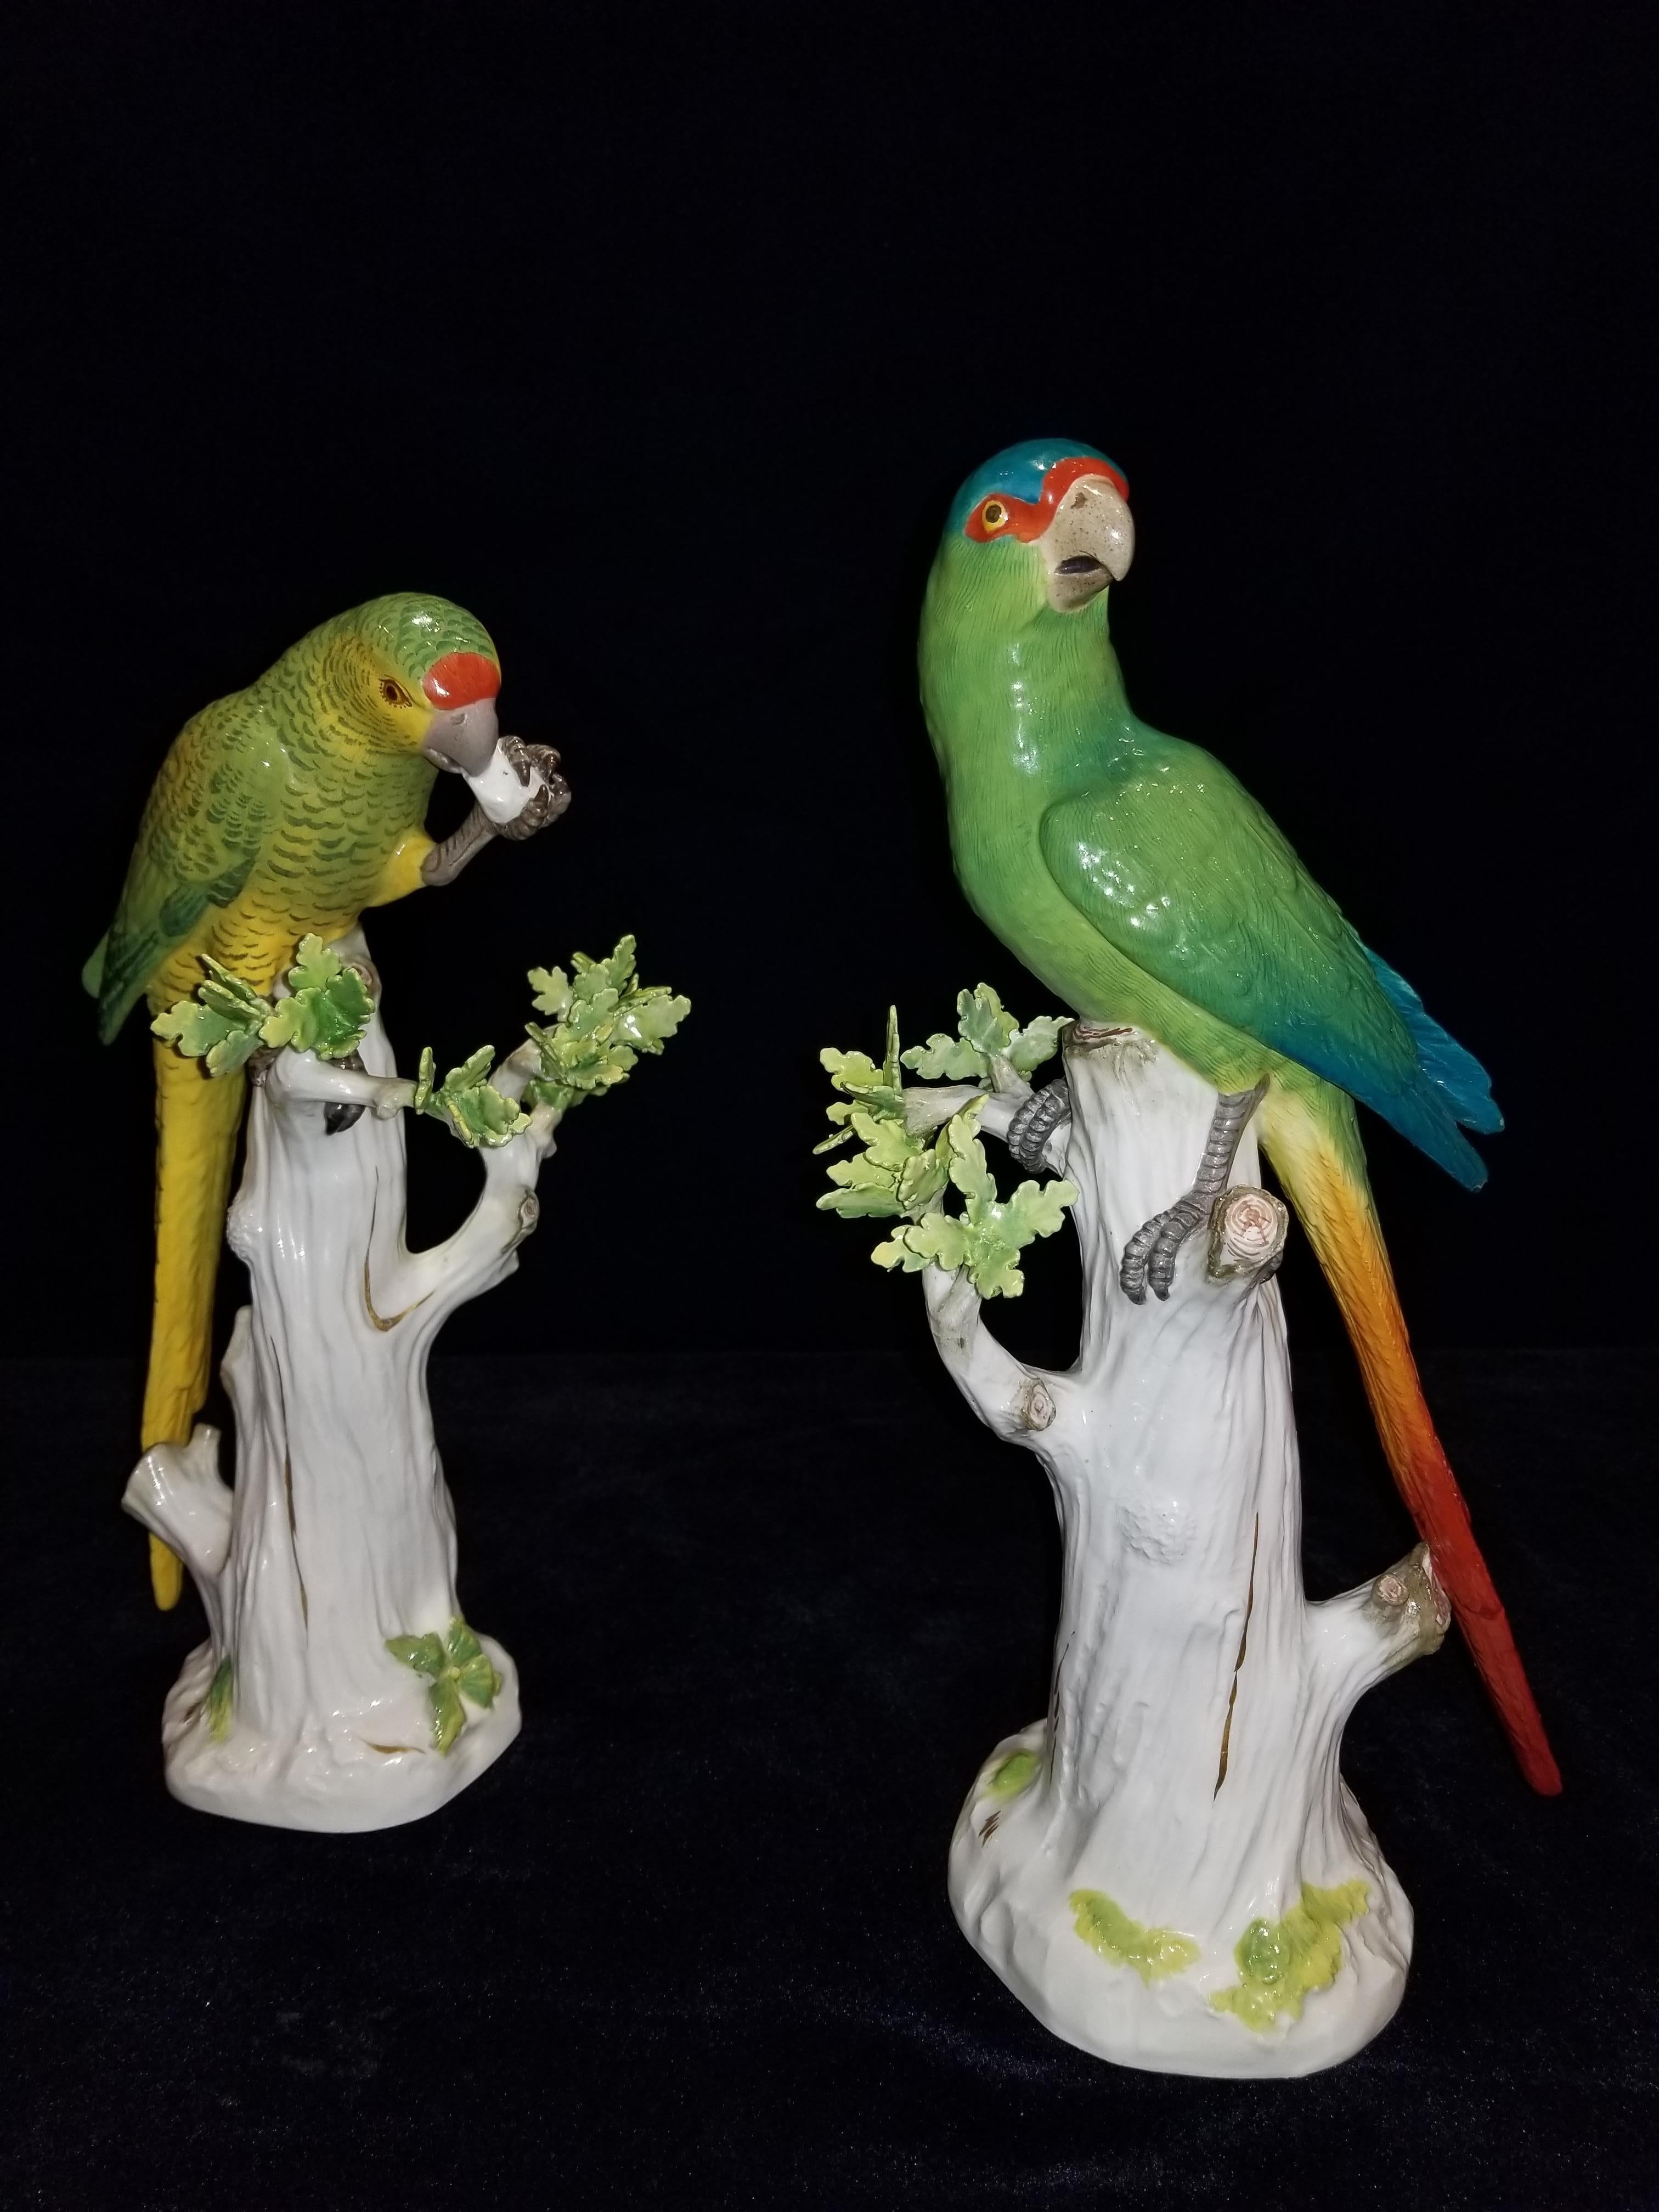 A fine pair of antique Meissen Porcelain figures of colorful parrots, each standing on a tree branch after a model by J. J. Kandler. One parrot is eating a fruit while the other parrot bearing beautiful leaves on its branches is glaring into the